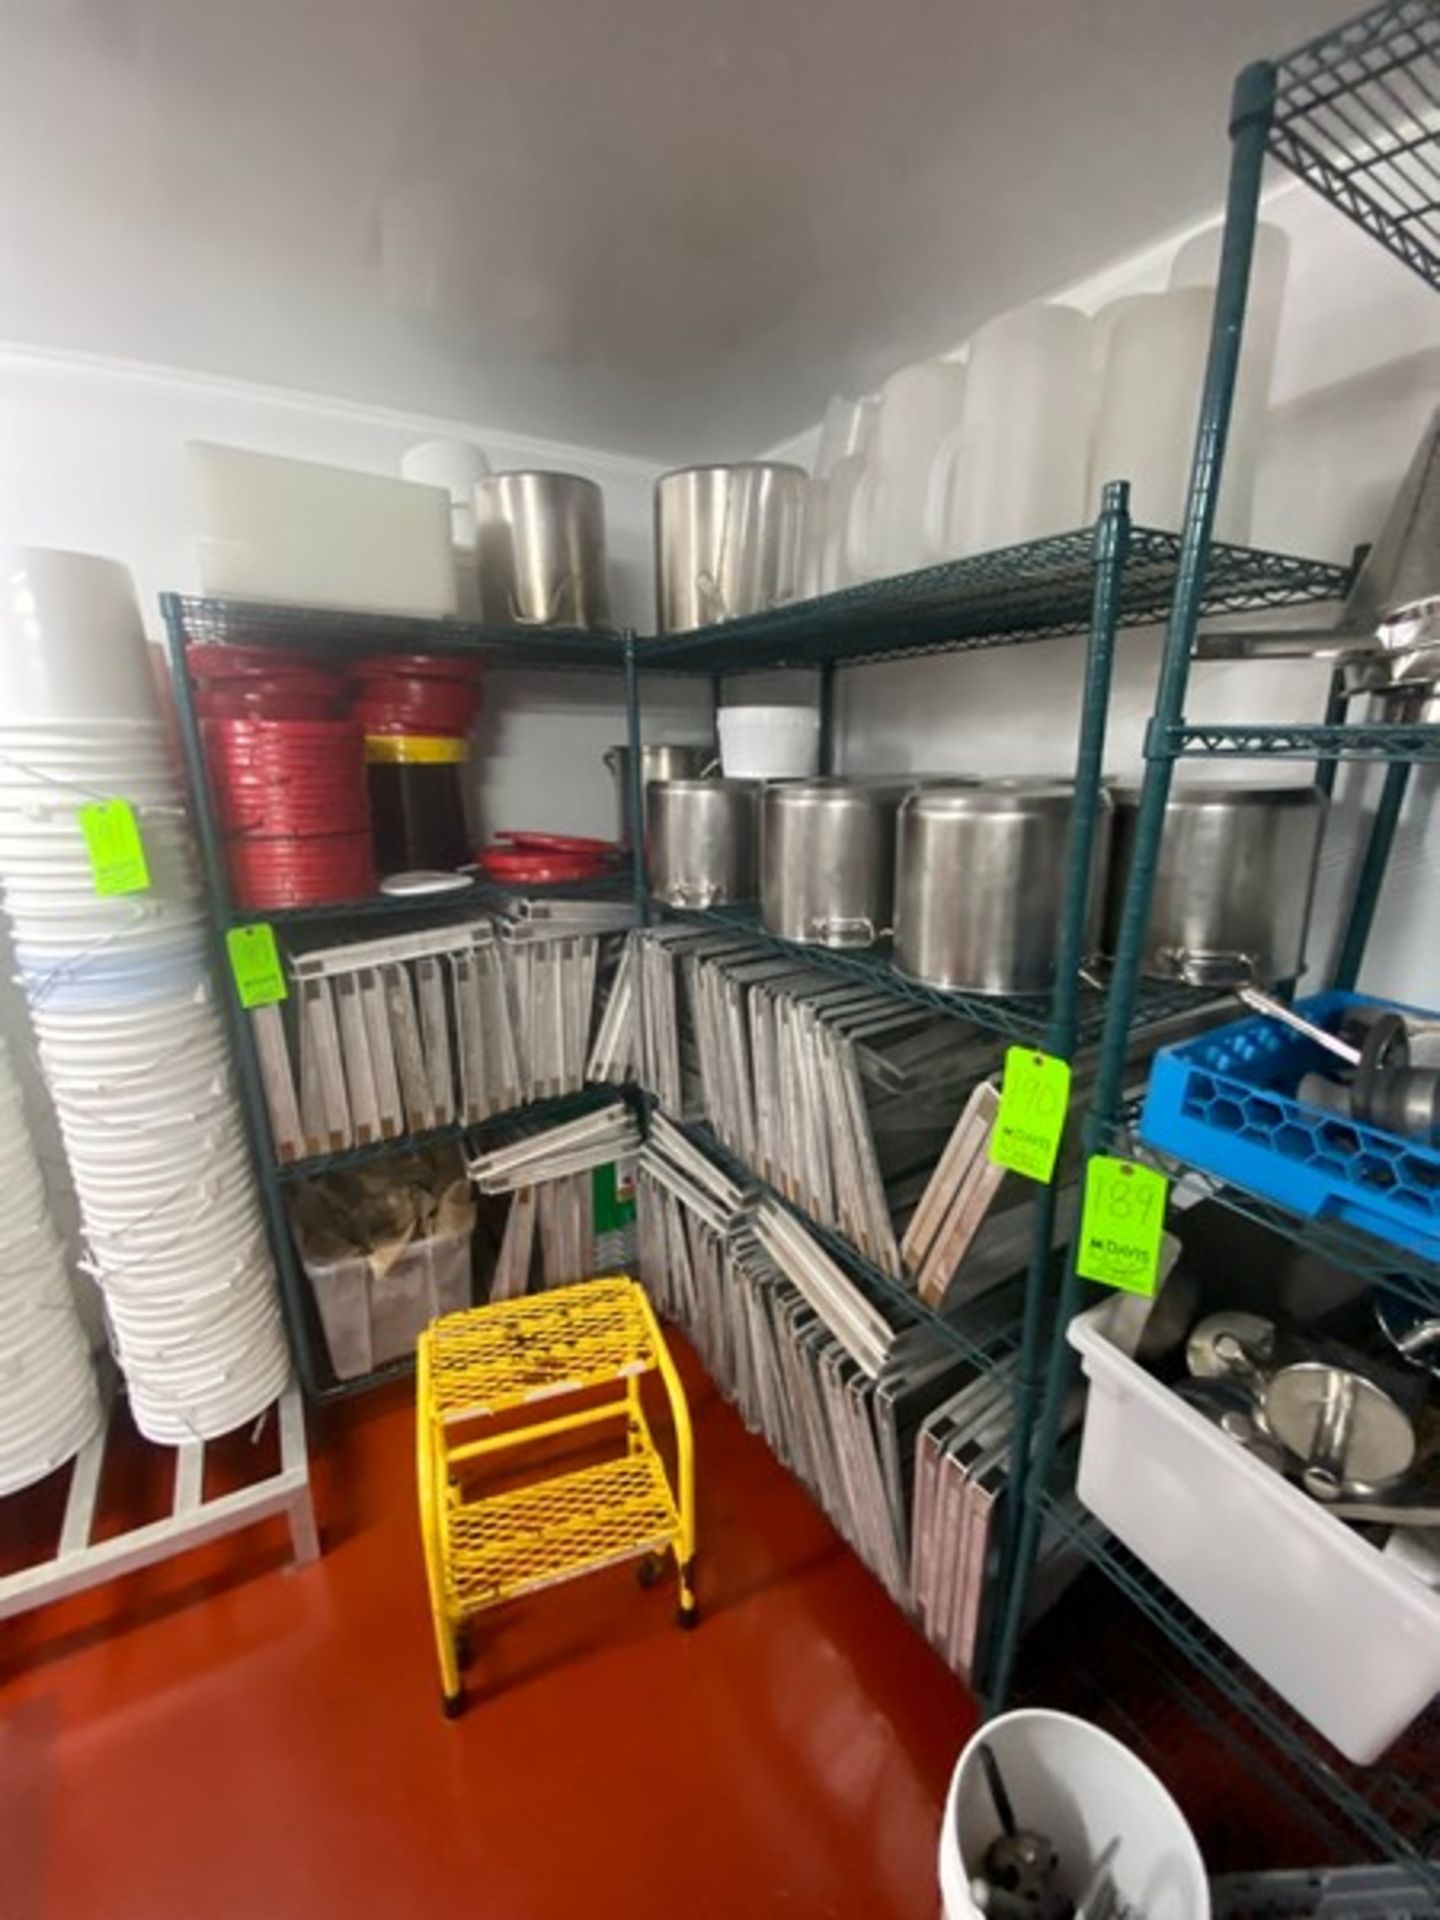 Lot of Assorted S/S Pots, Pans, Plastic Pitchers, Plasticware, & Other Present Contents (LOCATED